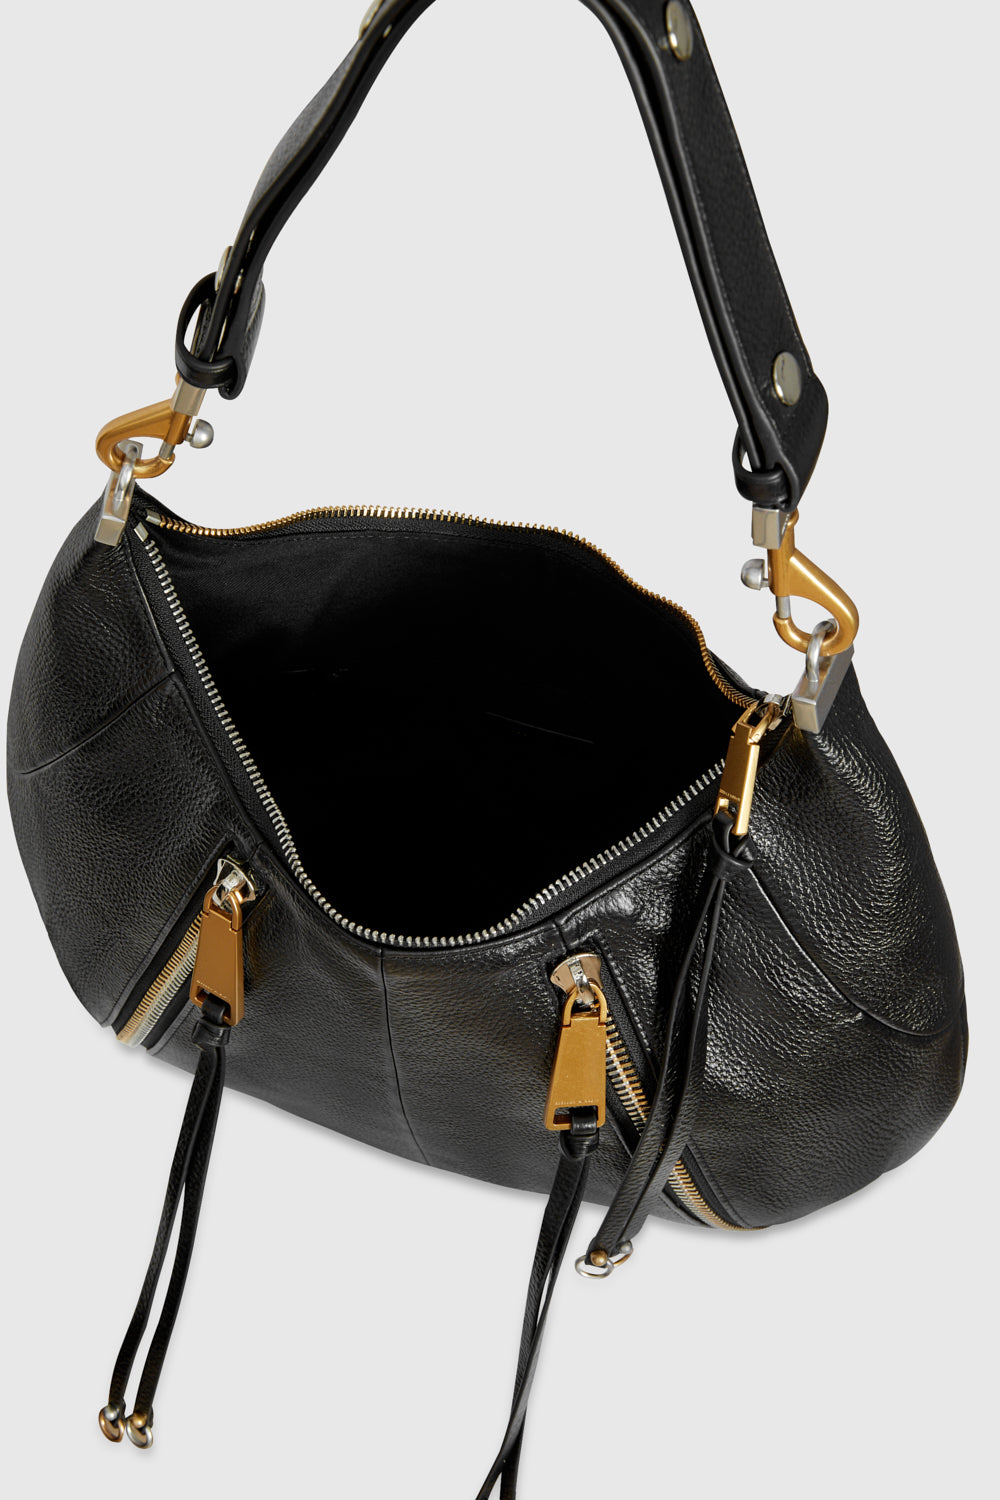 Black Leather Purse OPELLE Baby Ballet Bag With Zipper 